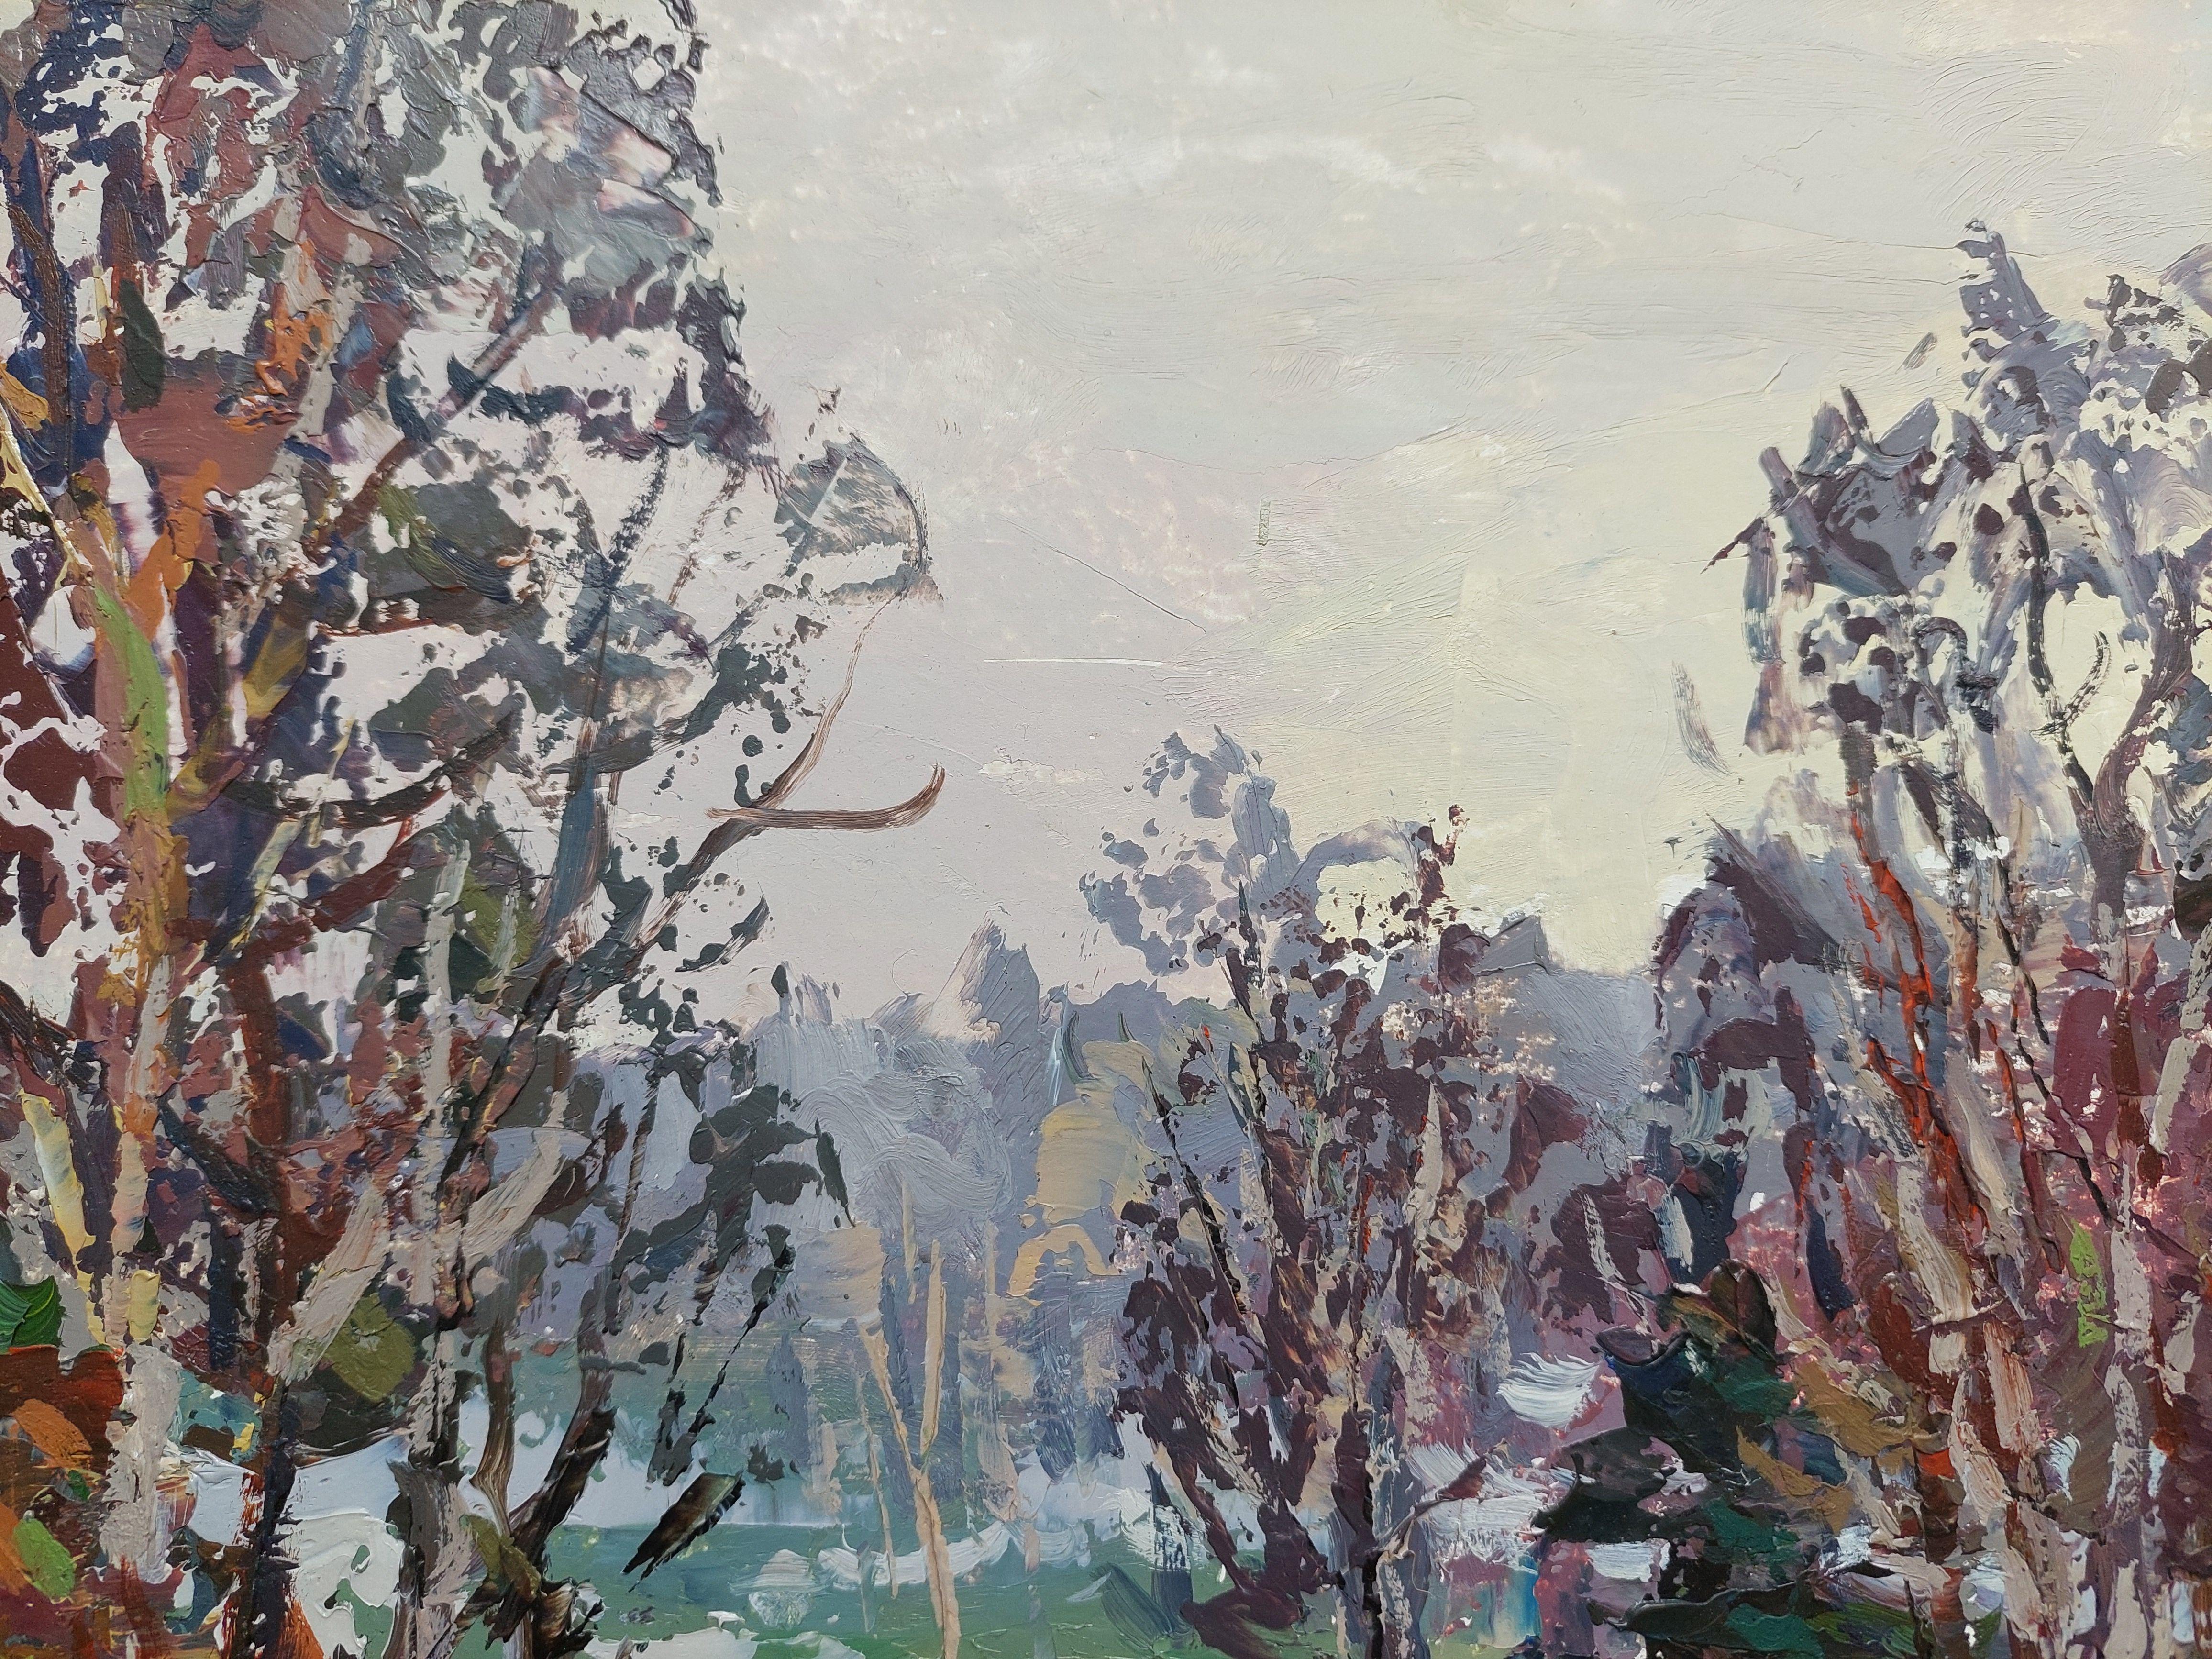 The first snow. 1989, oil on cardboard, 32,5x40,5 cm

The first snow depicted in the artist's work is characterized by fine detailing and nuanced coloring in soft pastel shades with contrasting accents.
The viewpoint shows a wide range of trees and